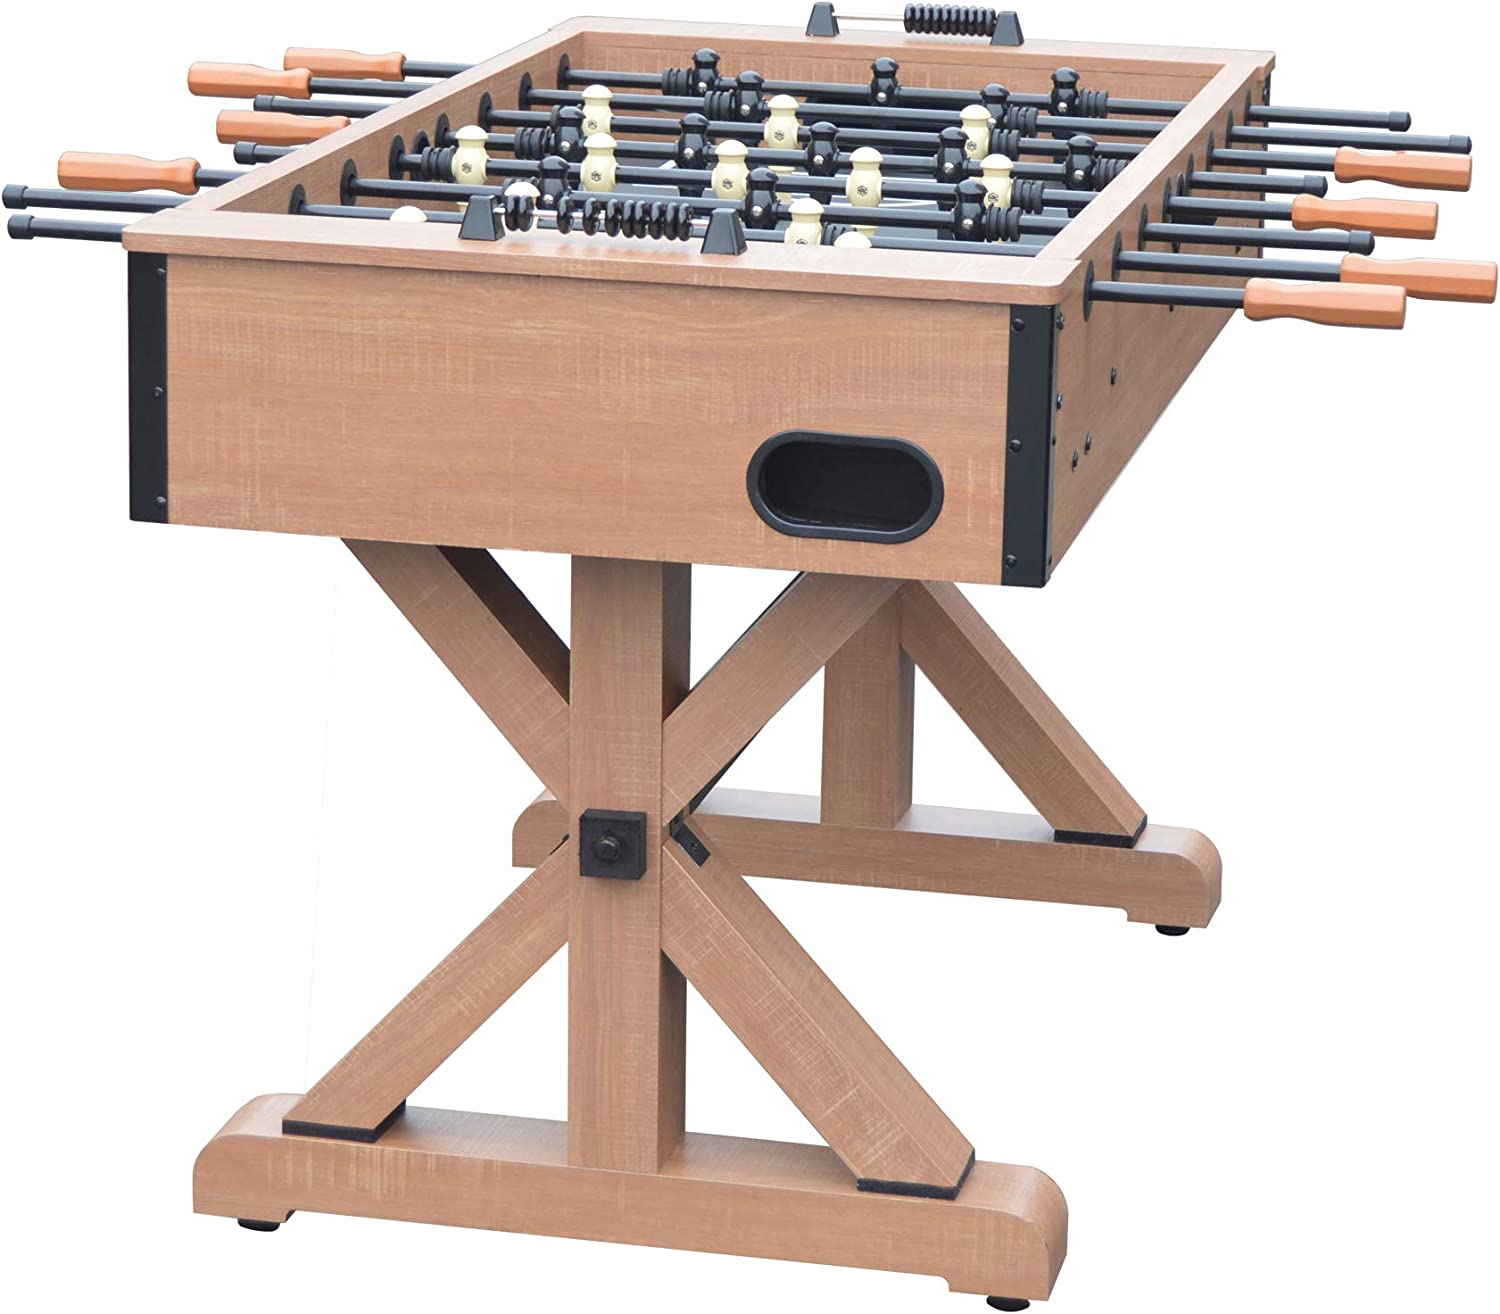 Hathaway Daulton 55-in Competition Foosball Table, Arcade Table Soccer for Game Rooms, Includes (2) 36-mm ABS Foosballs,Oak / Black,BG50351